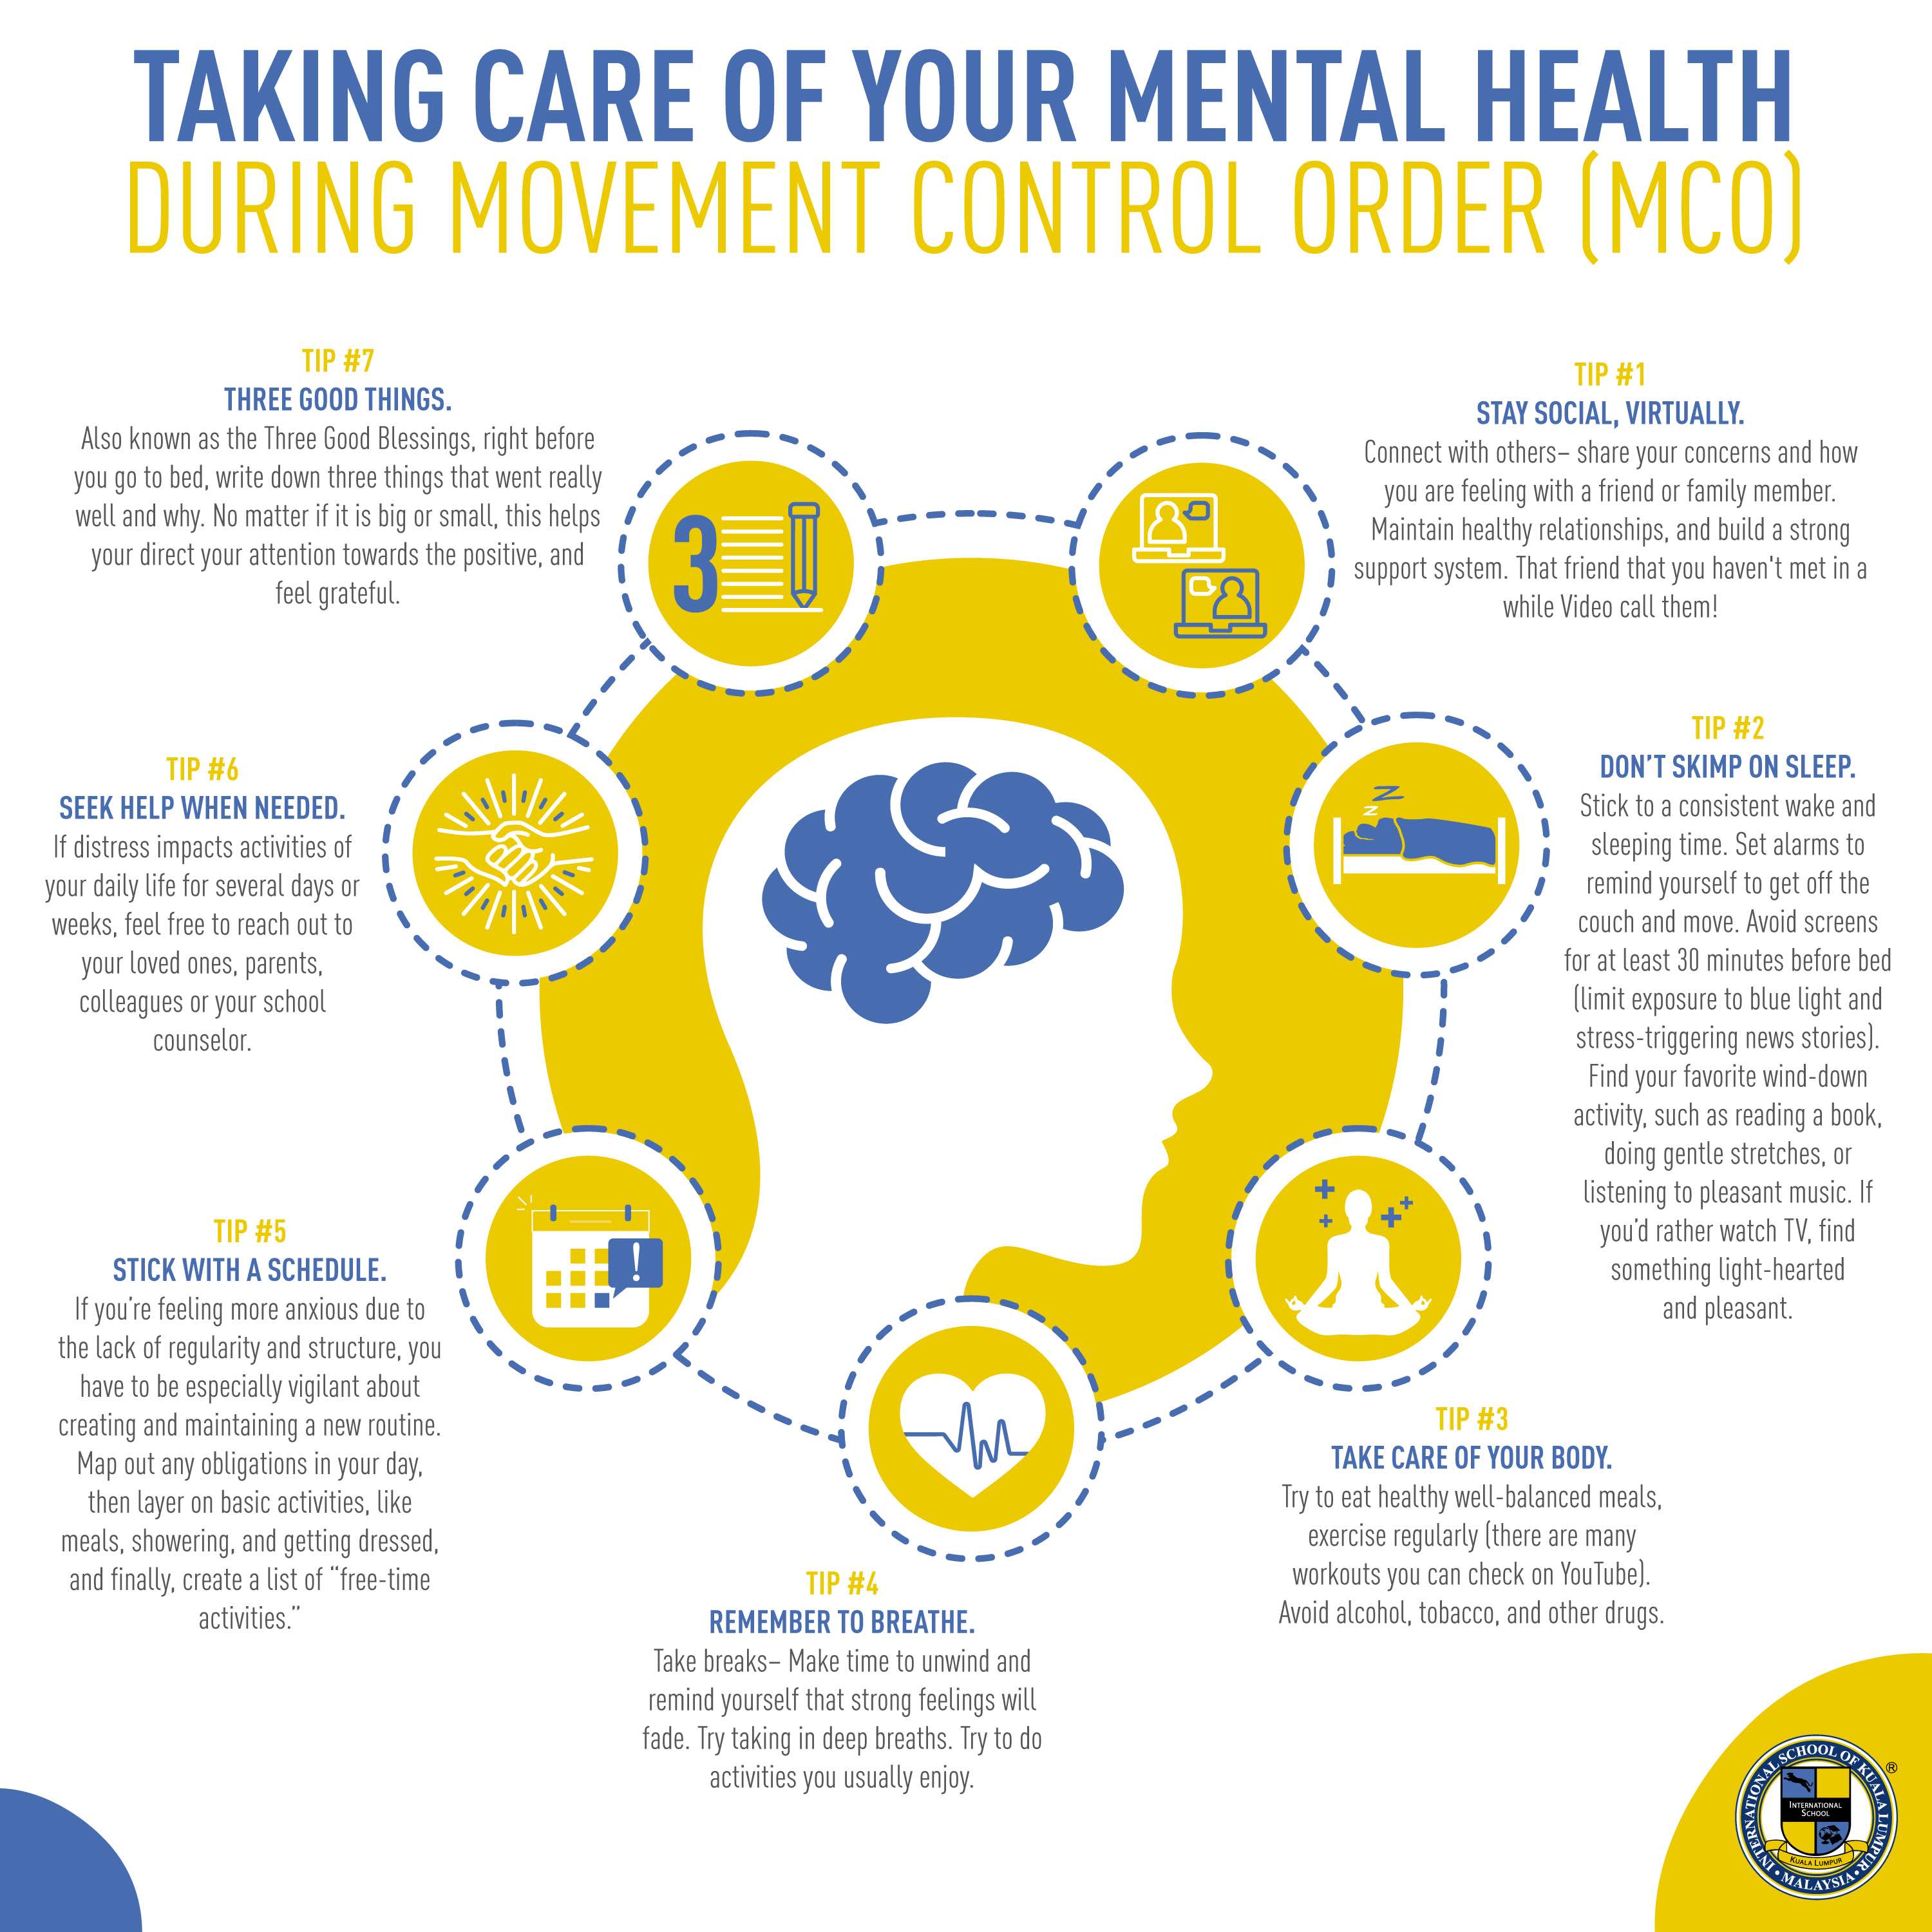 TAKING CARE OF MENTAL HEALTH